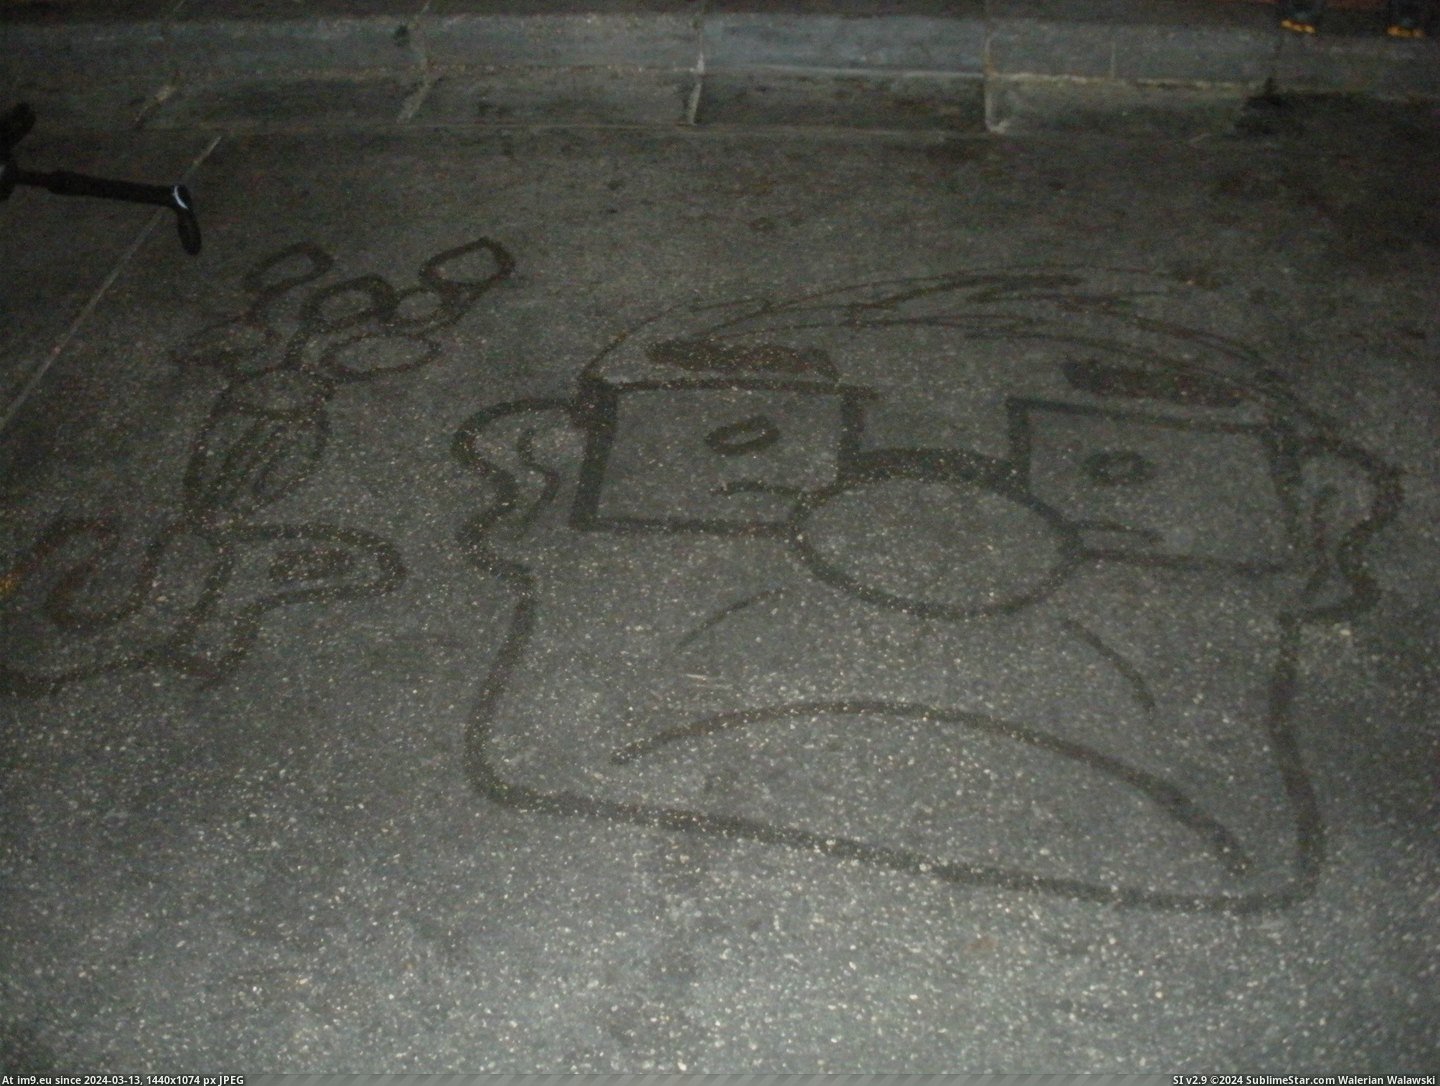 #World #Water #Disney #Guests #Janitor #Broom #Entertain #Characters #Drew #Sidewalk [Pics] As a janitor at Disney World, I drew characters with water and a broom on the sidewalk to entertain guests. 1 Pic. (Image of album My r/PICS favs))